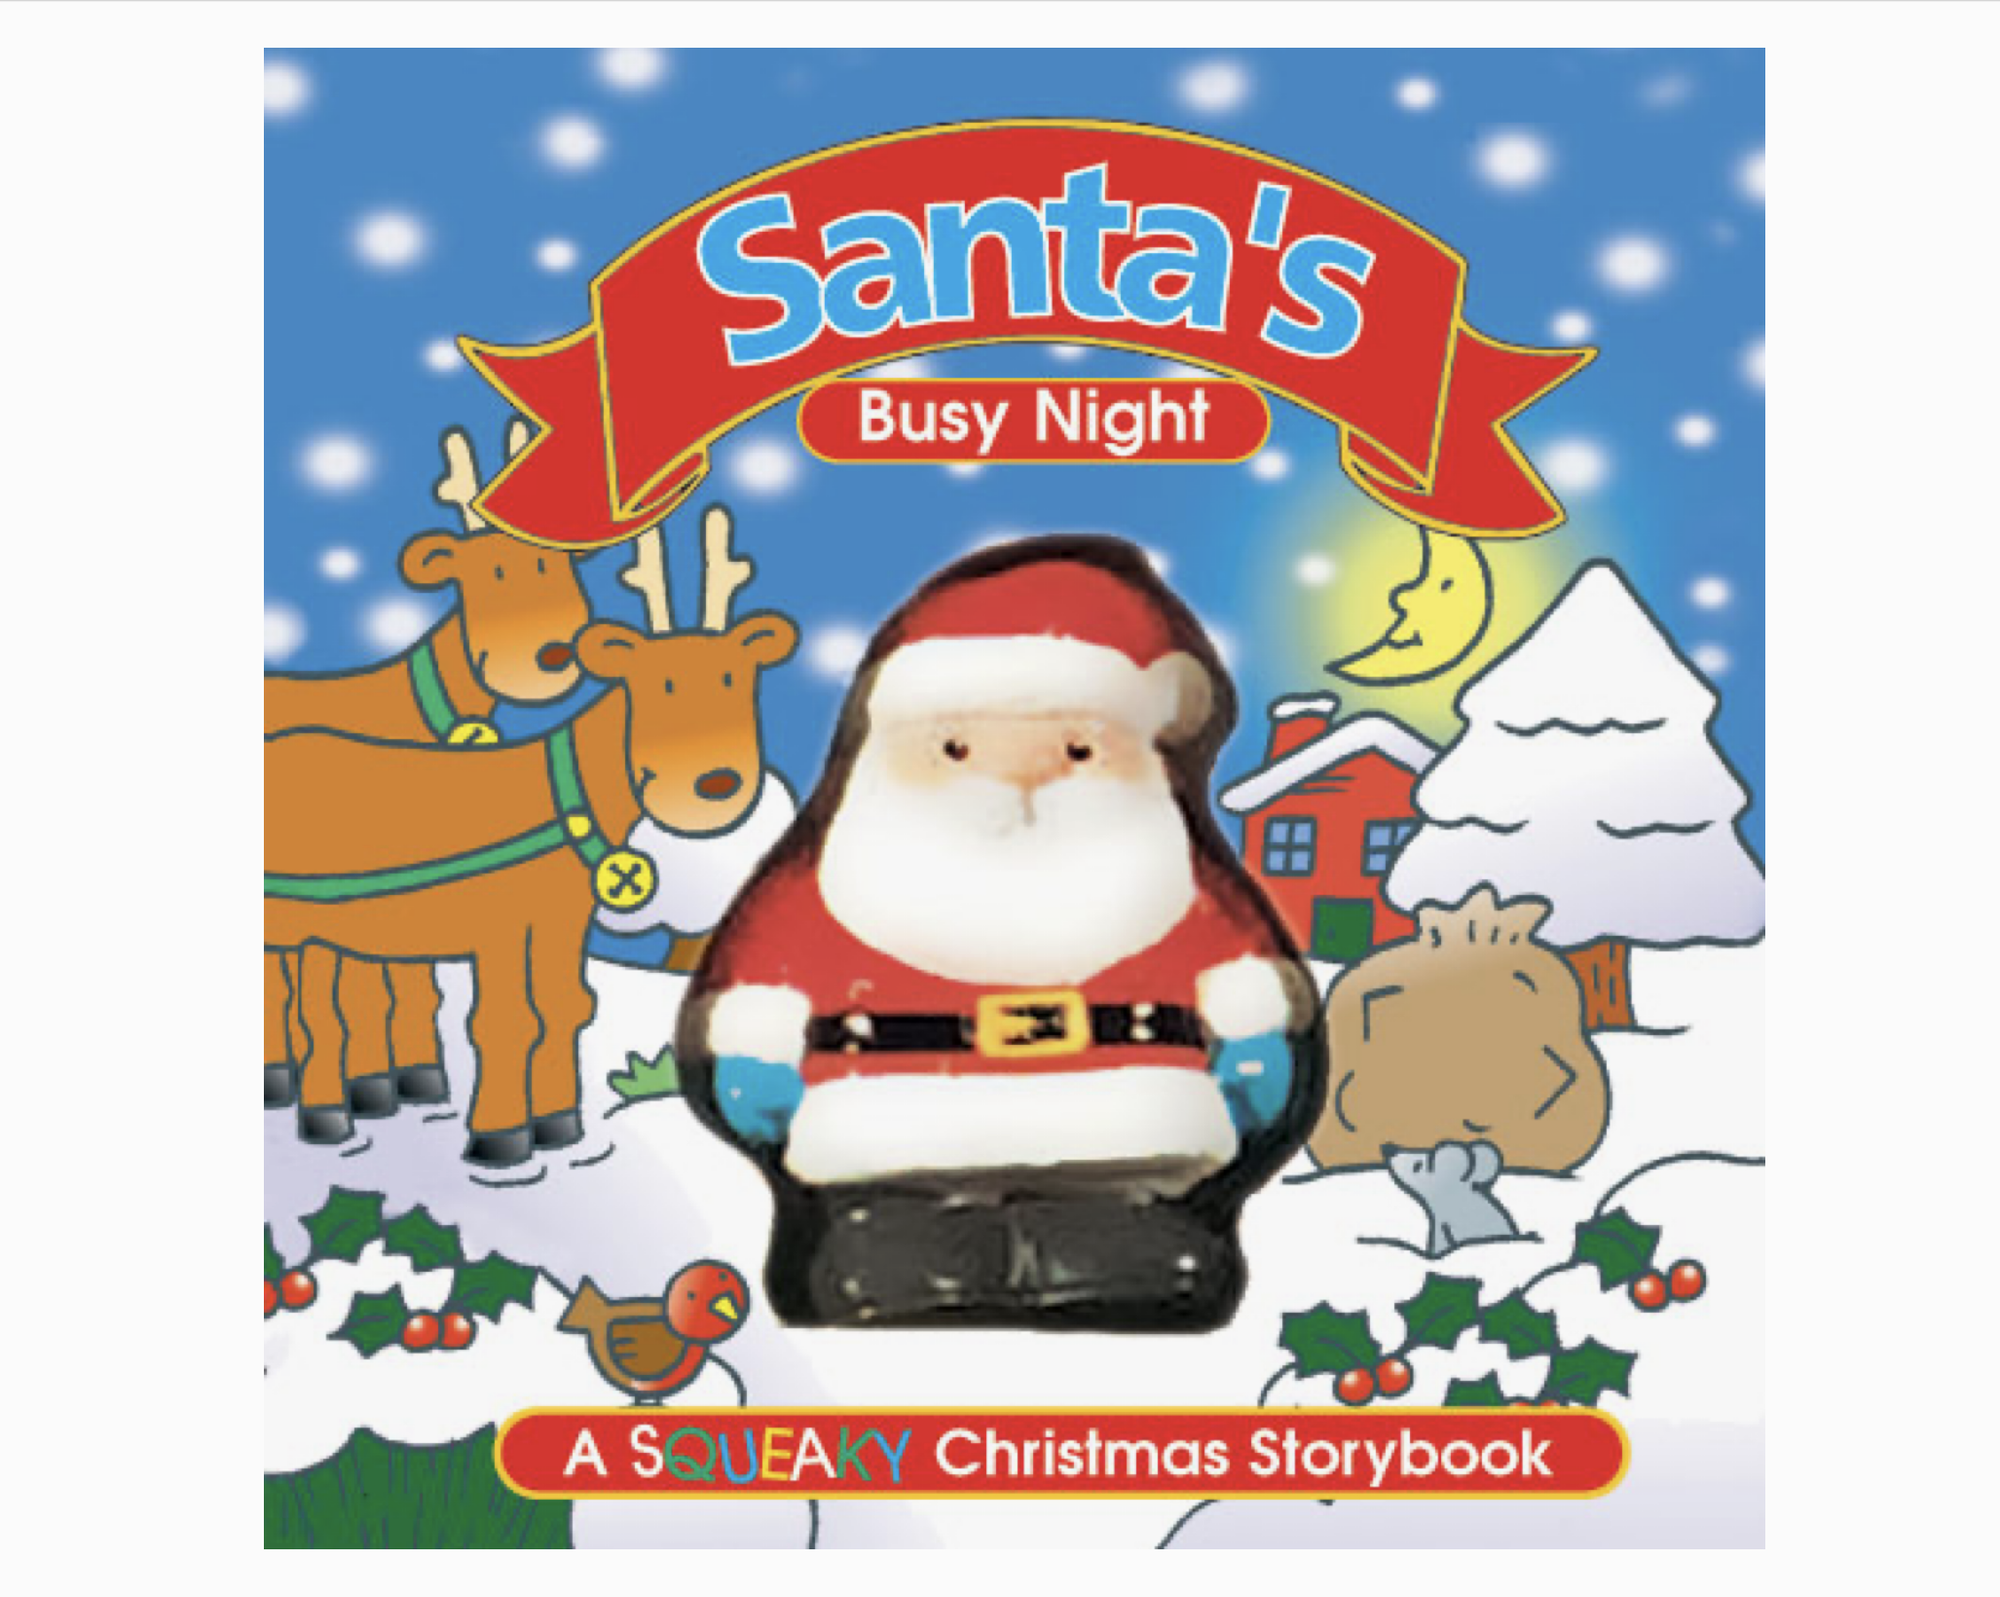 A Squeaky Christmas Story Book-Santa's Busy Night